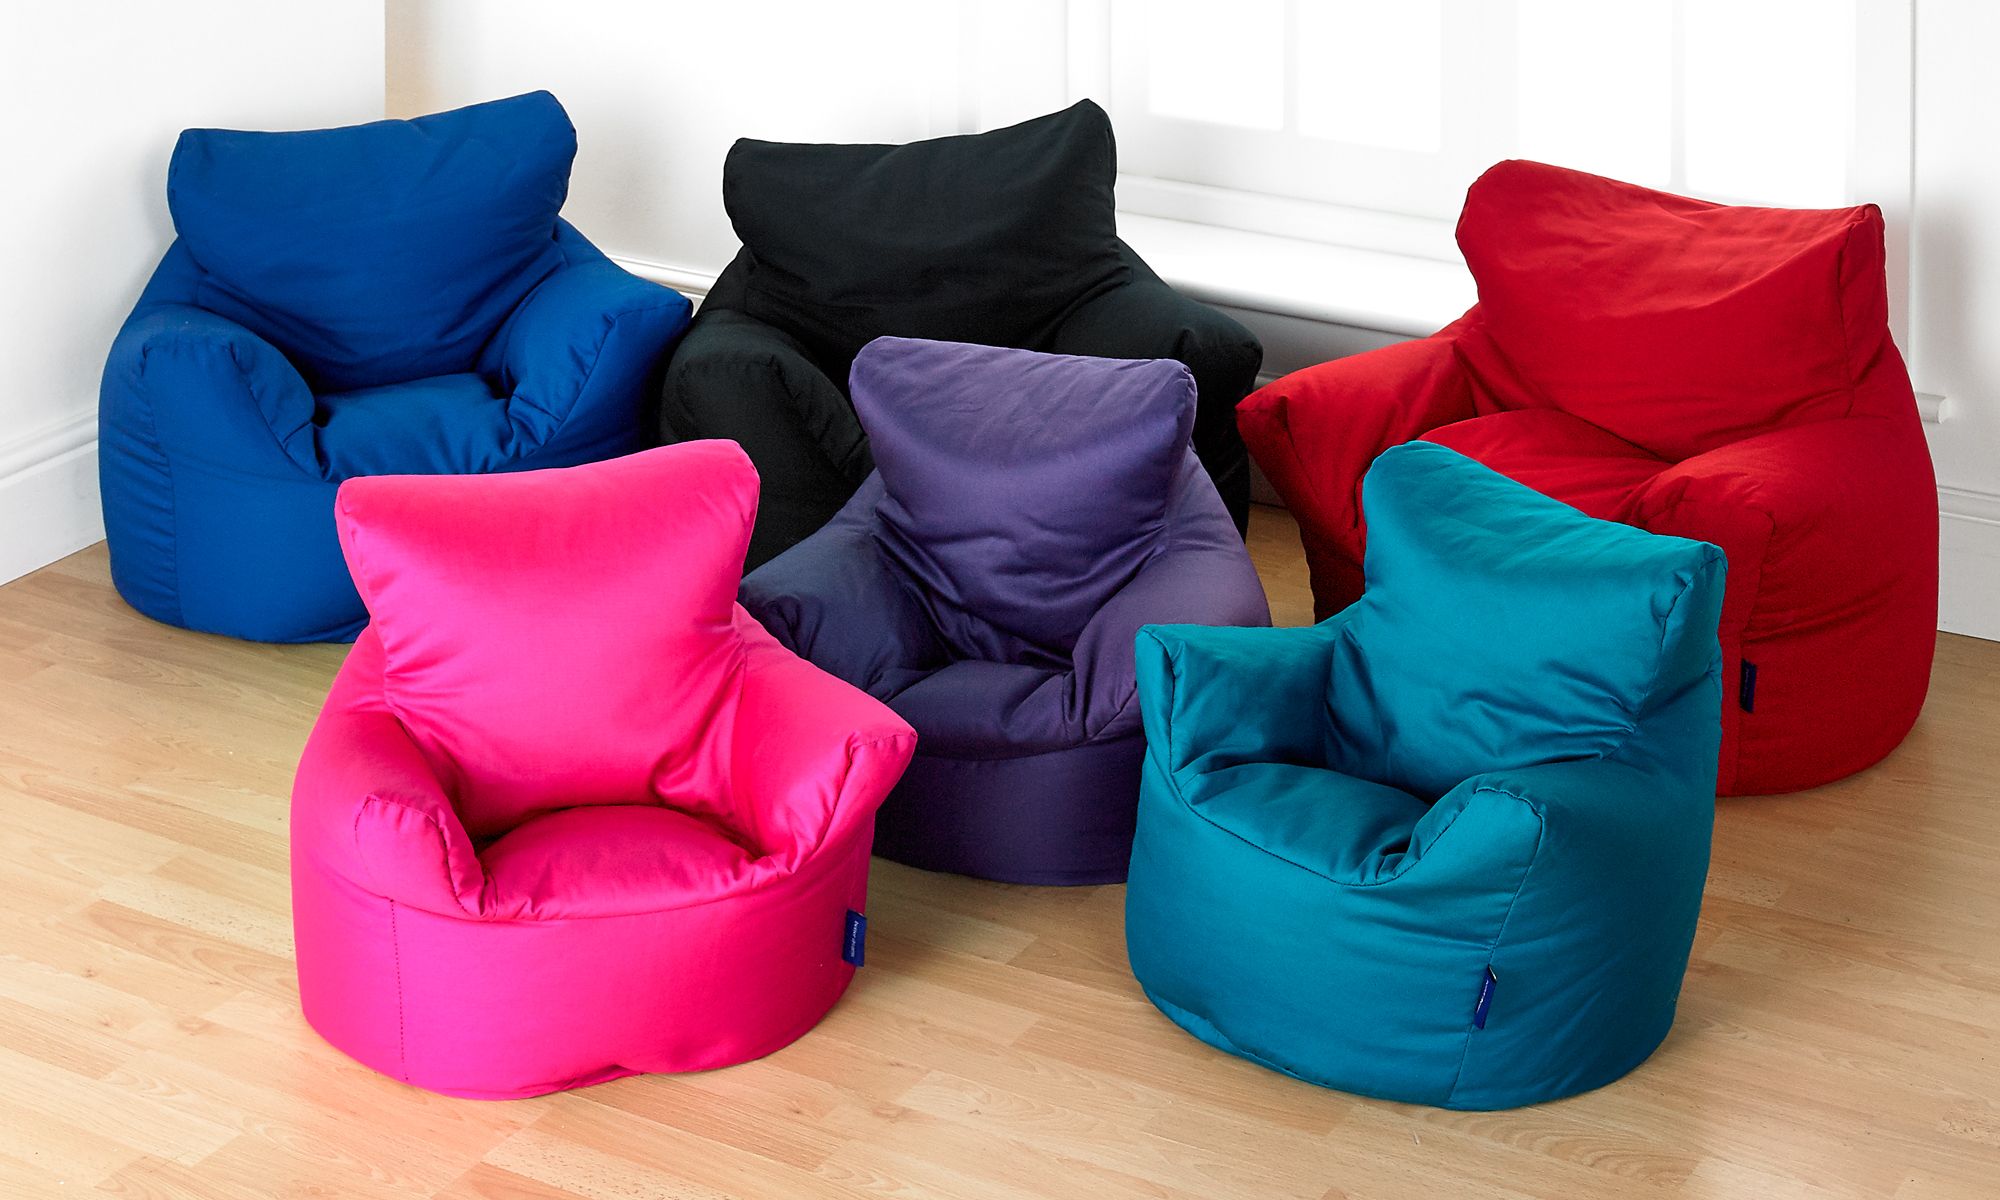 Details-about-Kids-Childrens-Bean-Bag-Seat-Chairs-Fully-Filled-blue-black-red-pink-teal-grey